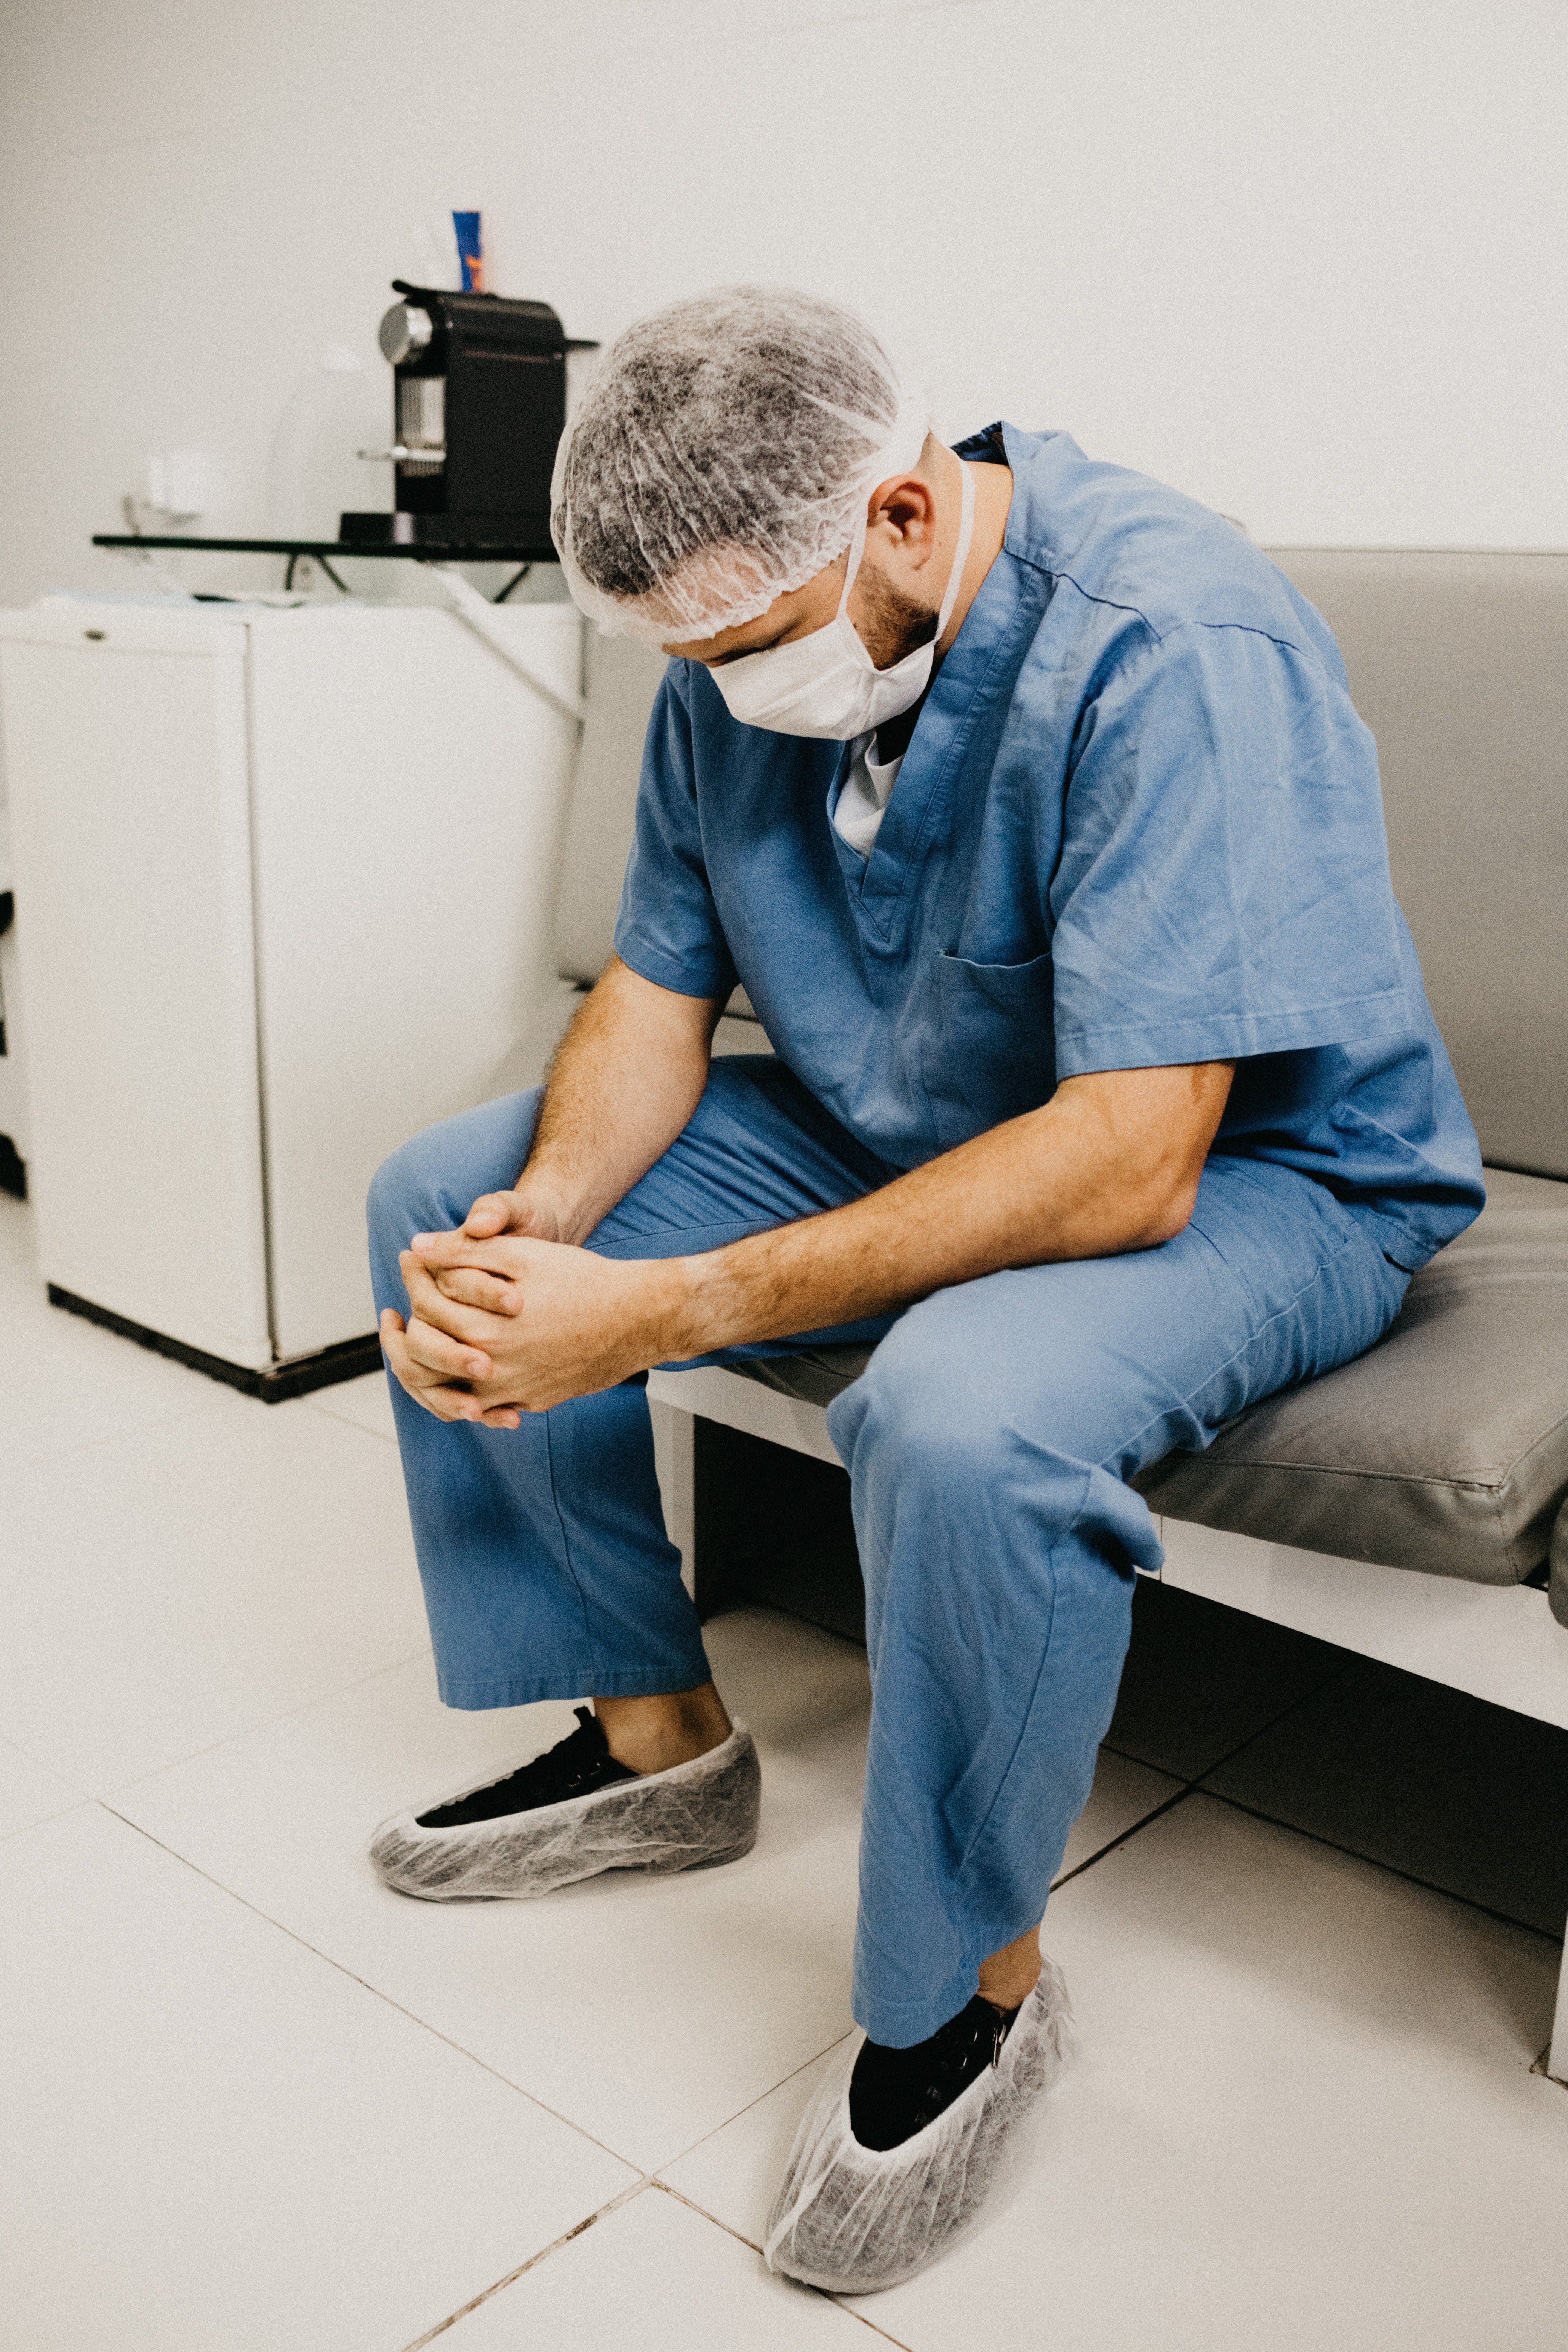 A medical professional sitting on a bench in their scrubs. | Source: Pexels